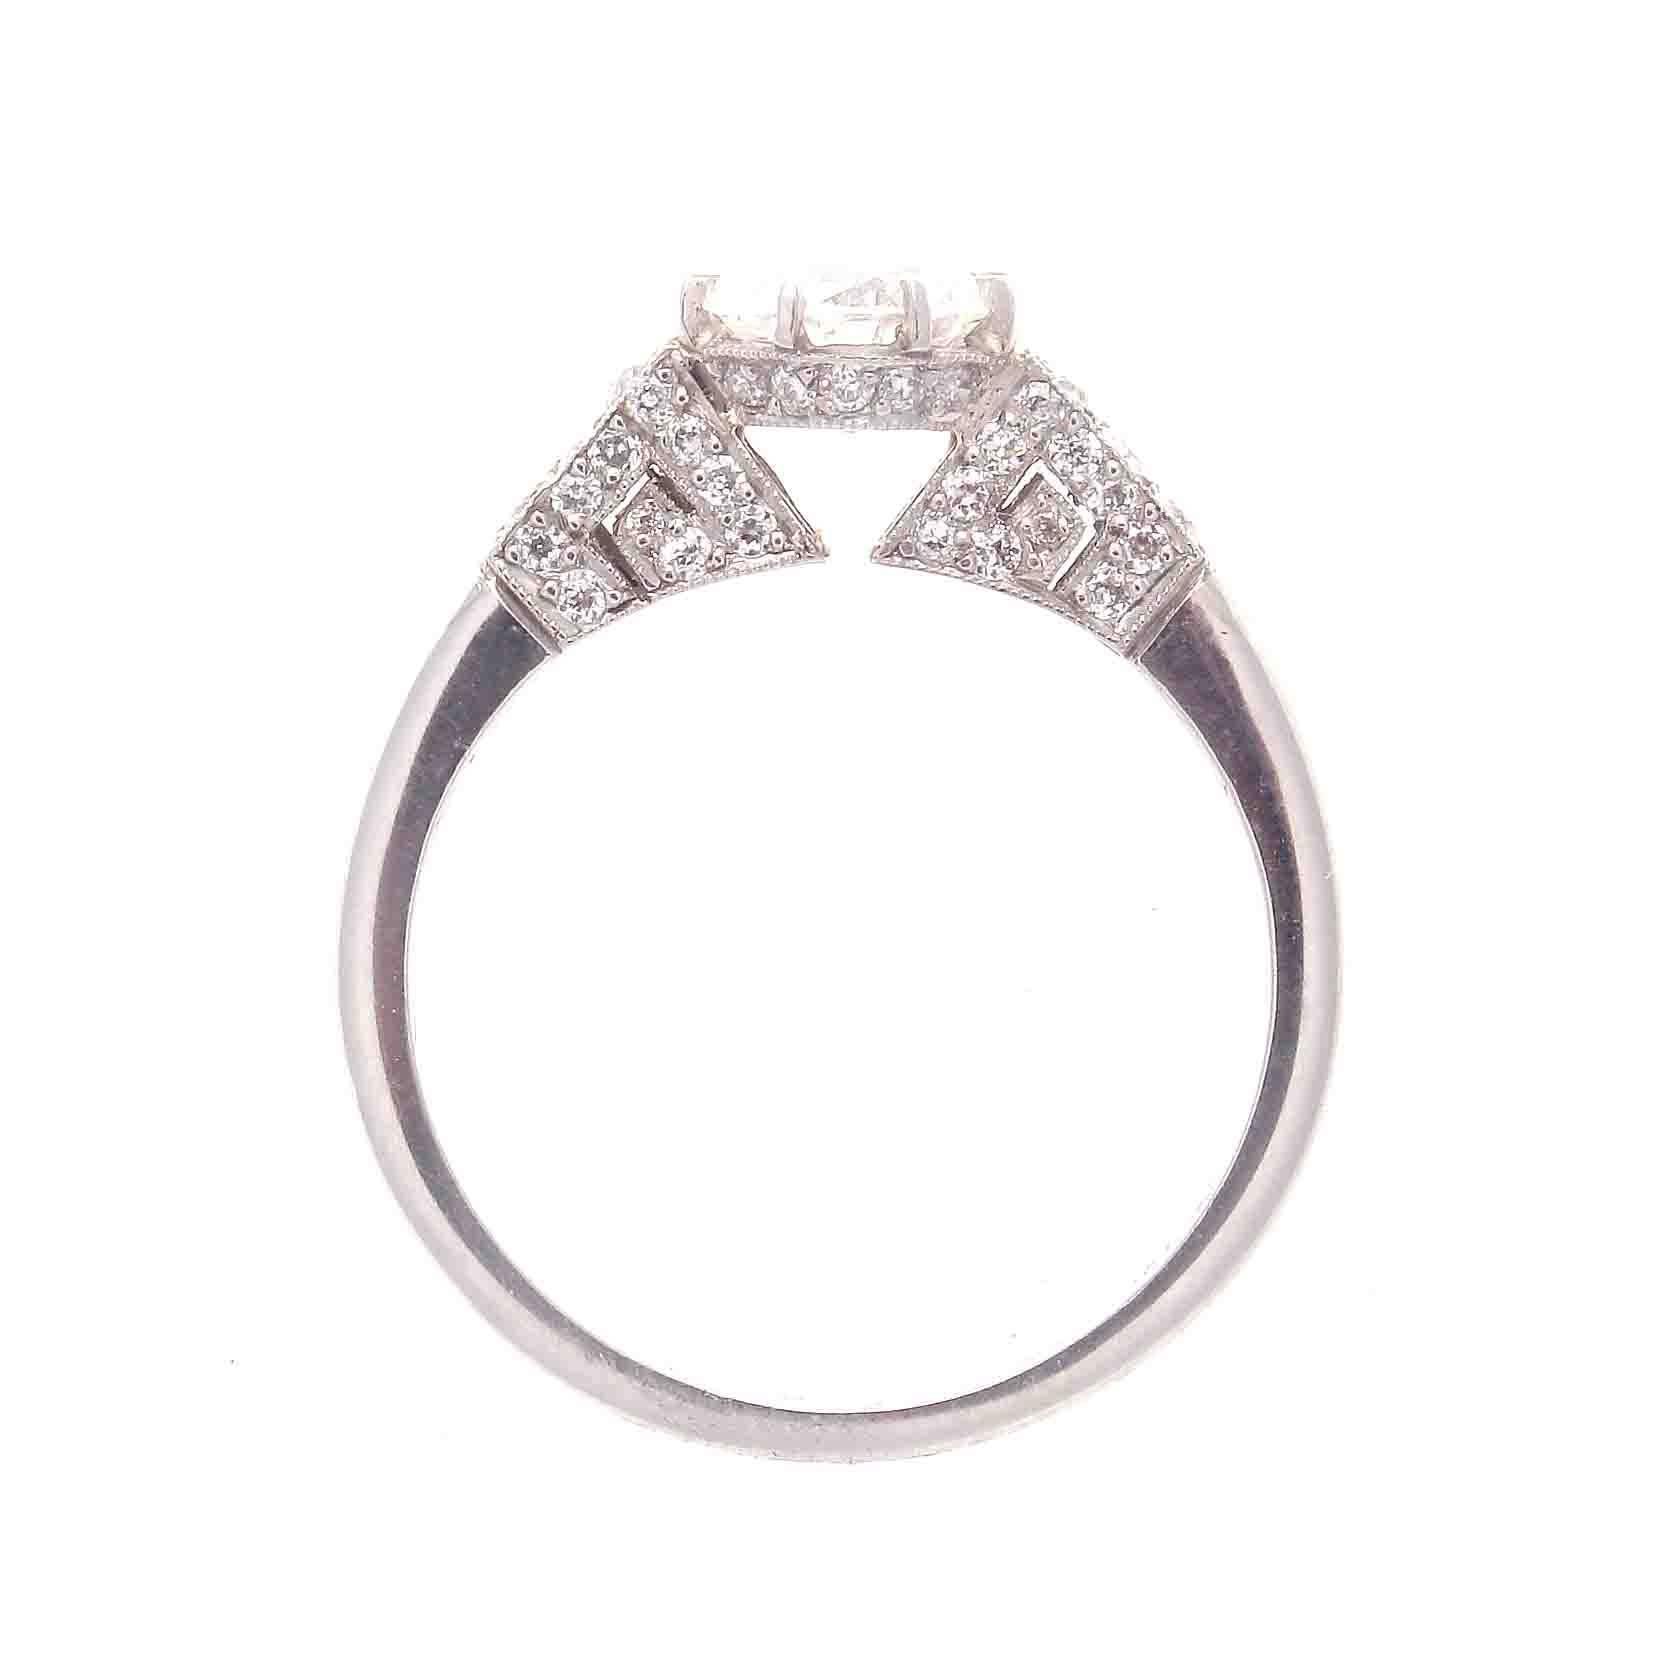 A modern creation of delicate brilliance staying true to traditional ideology. Featuring a 0.96 carat round brilliant cut diamond that is I color, VS2 clarity. Masterfully hand crafted in platinum.

Ring size 7 and may easily be resized to fit, if